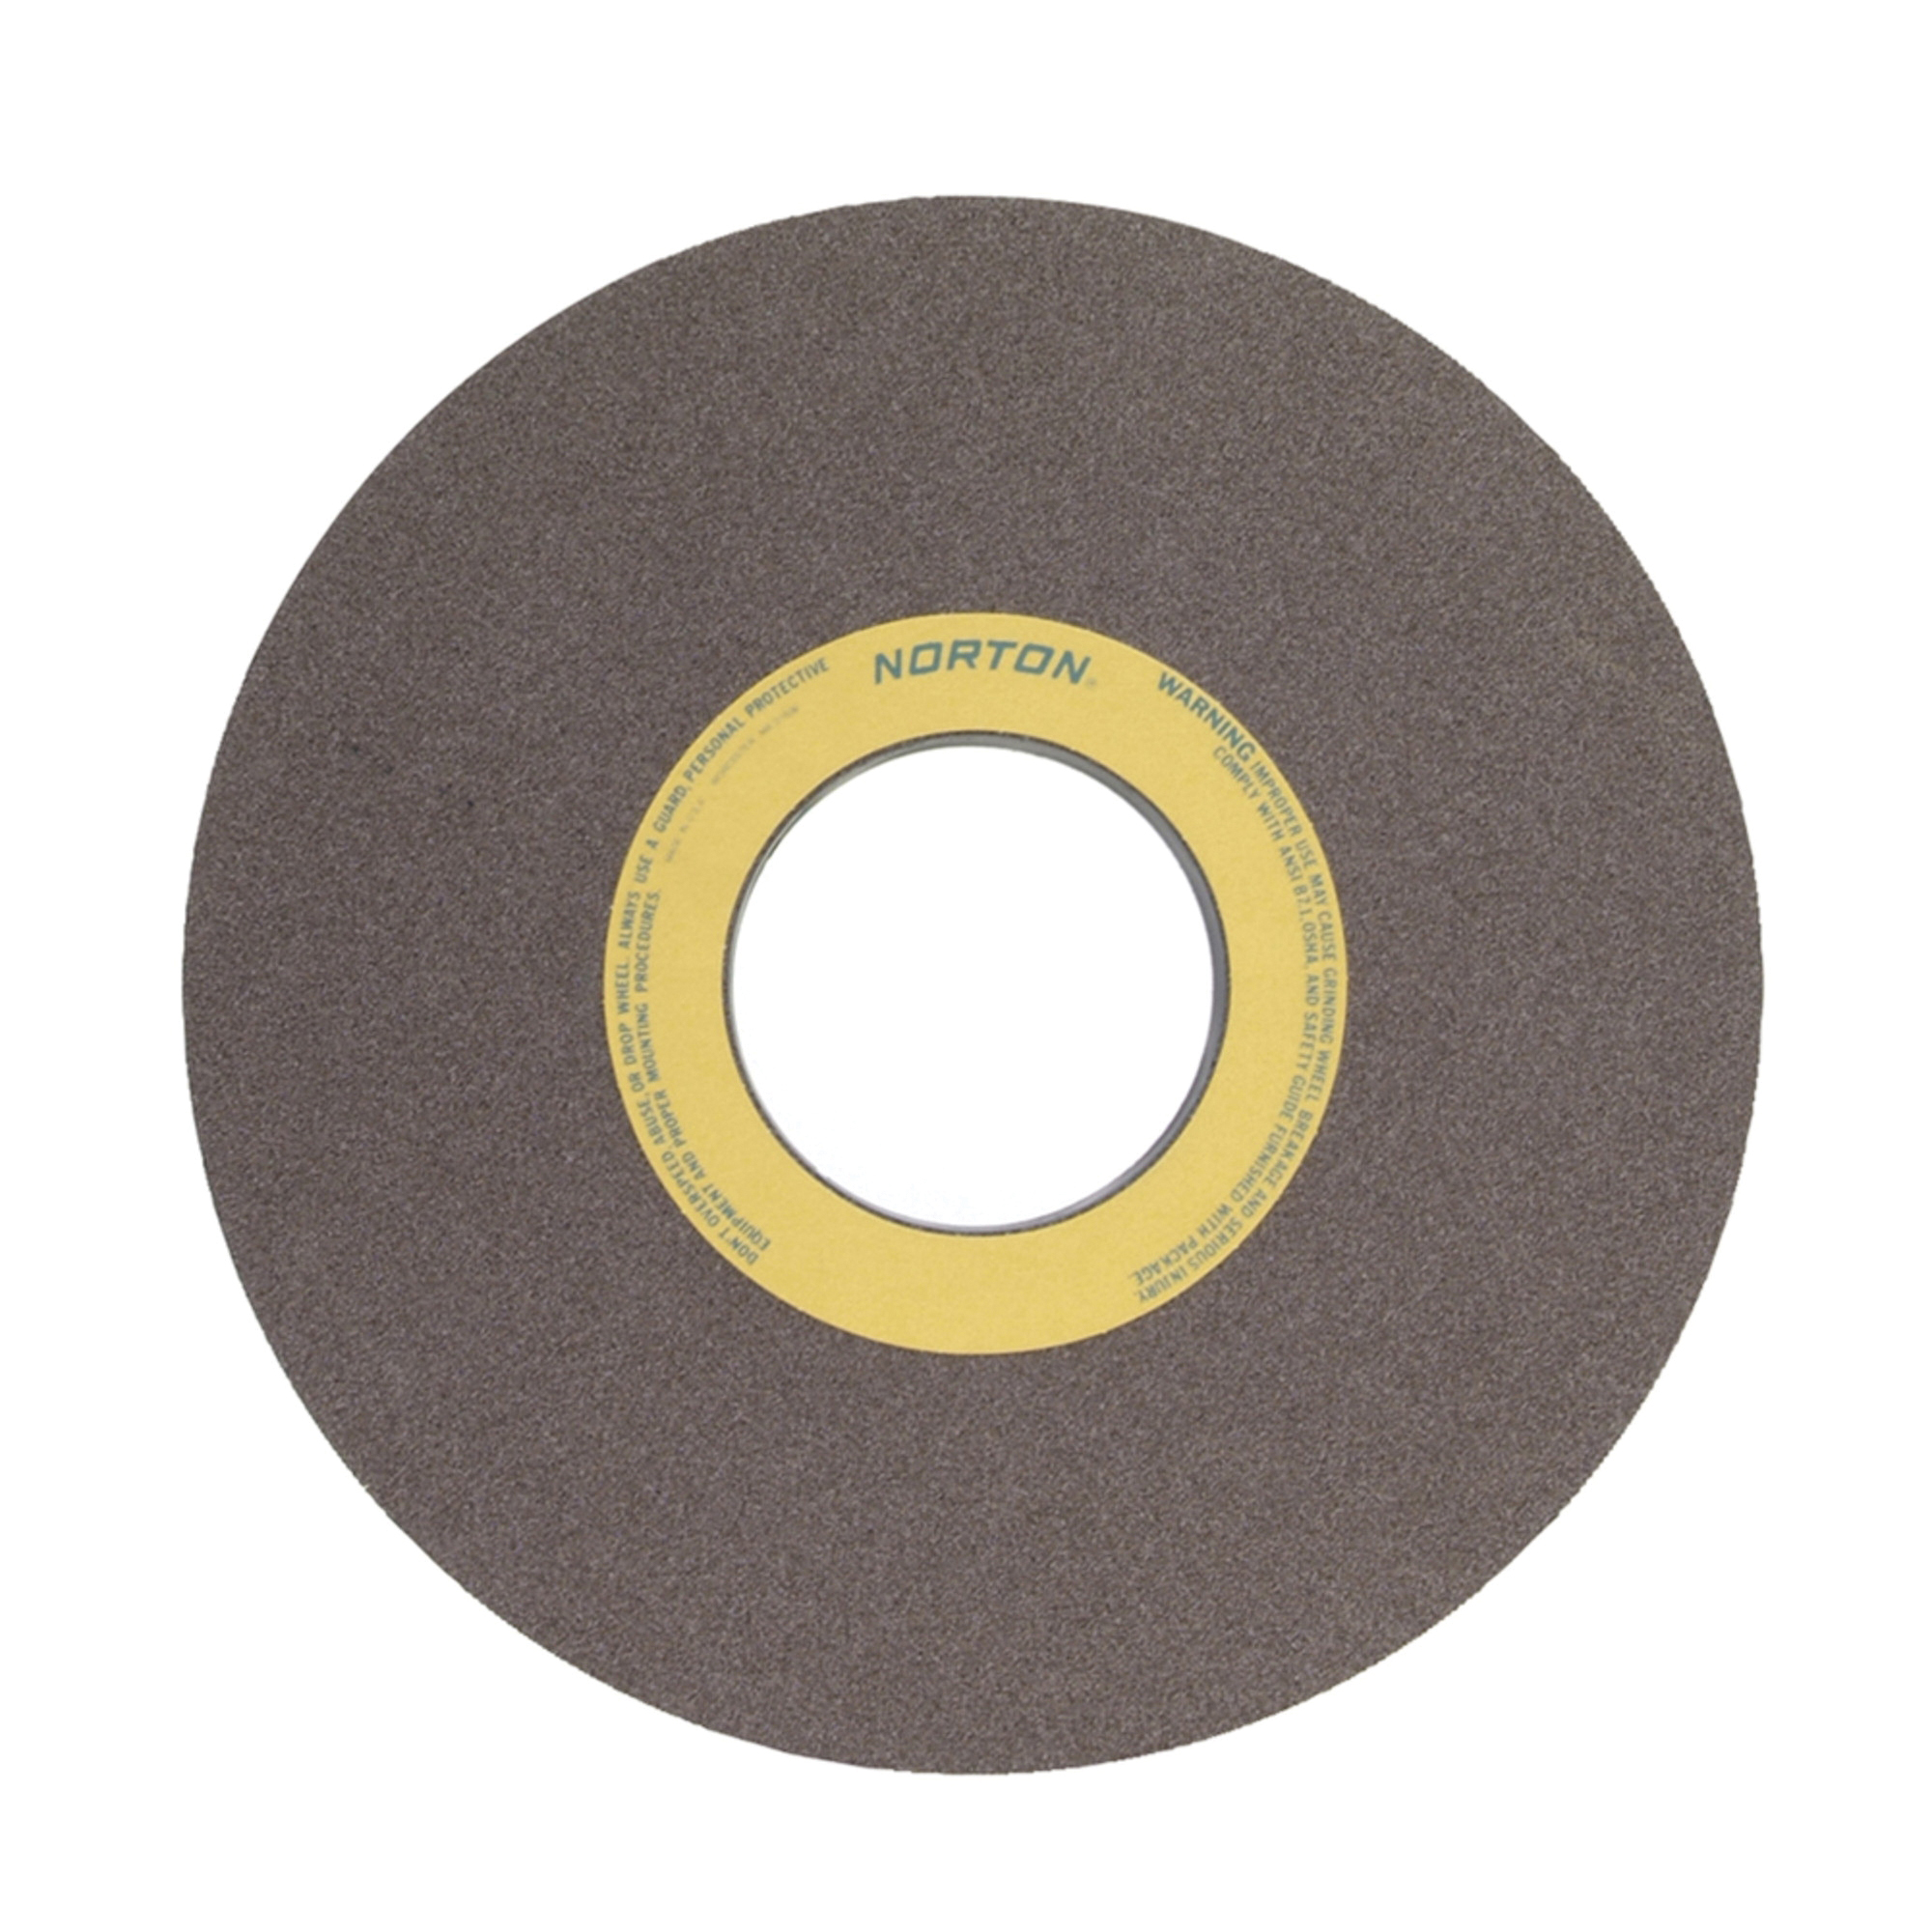 Norton® 69078666447 64A Surface and Cylindrical Grinding Wheel, 20 in Dia x 3 in THK, 8 in Center Hole, 46 Grit, Aluminum Oxide Abrasive